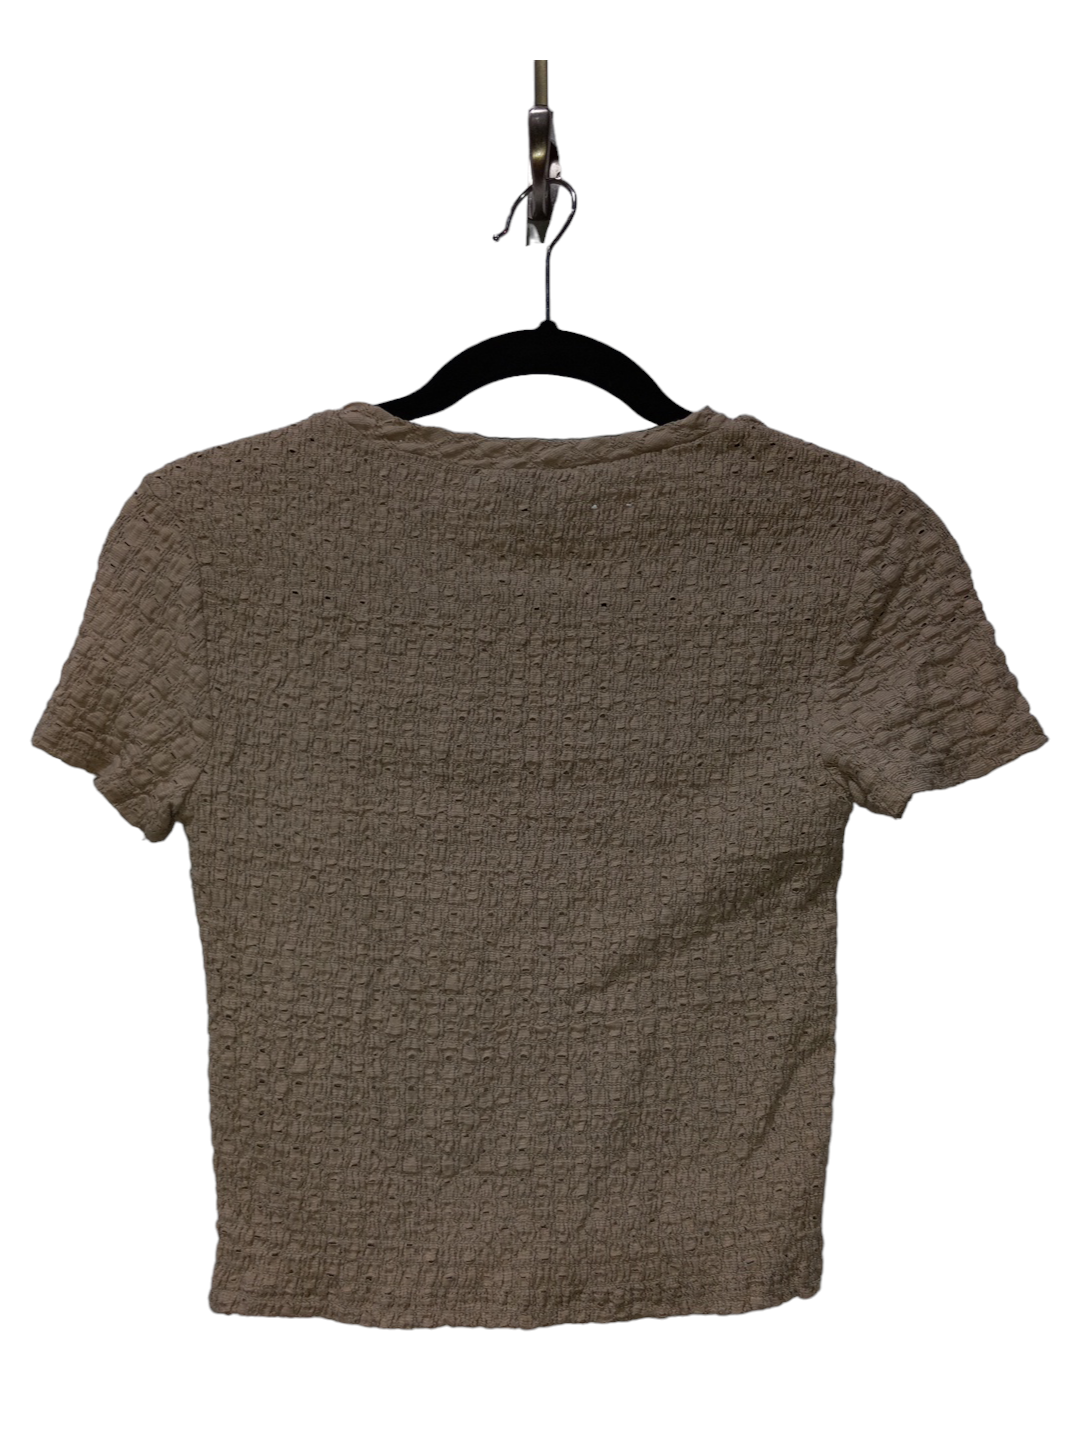 Brown Top Short Sleeve Forever 21, Size S